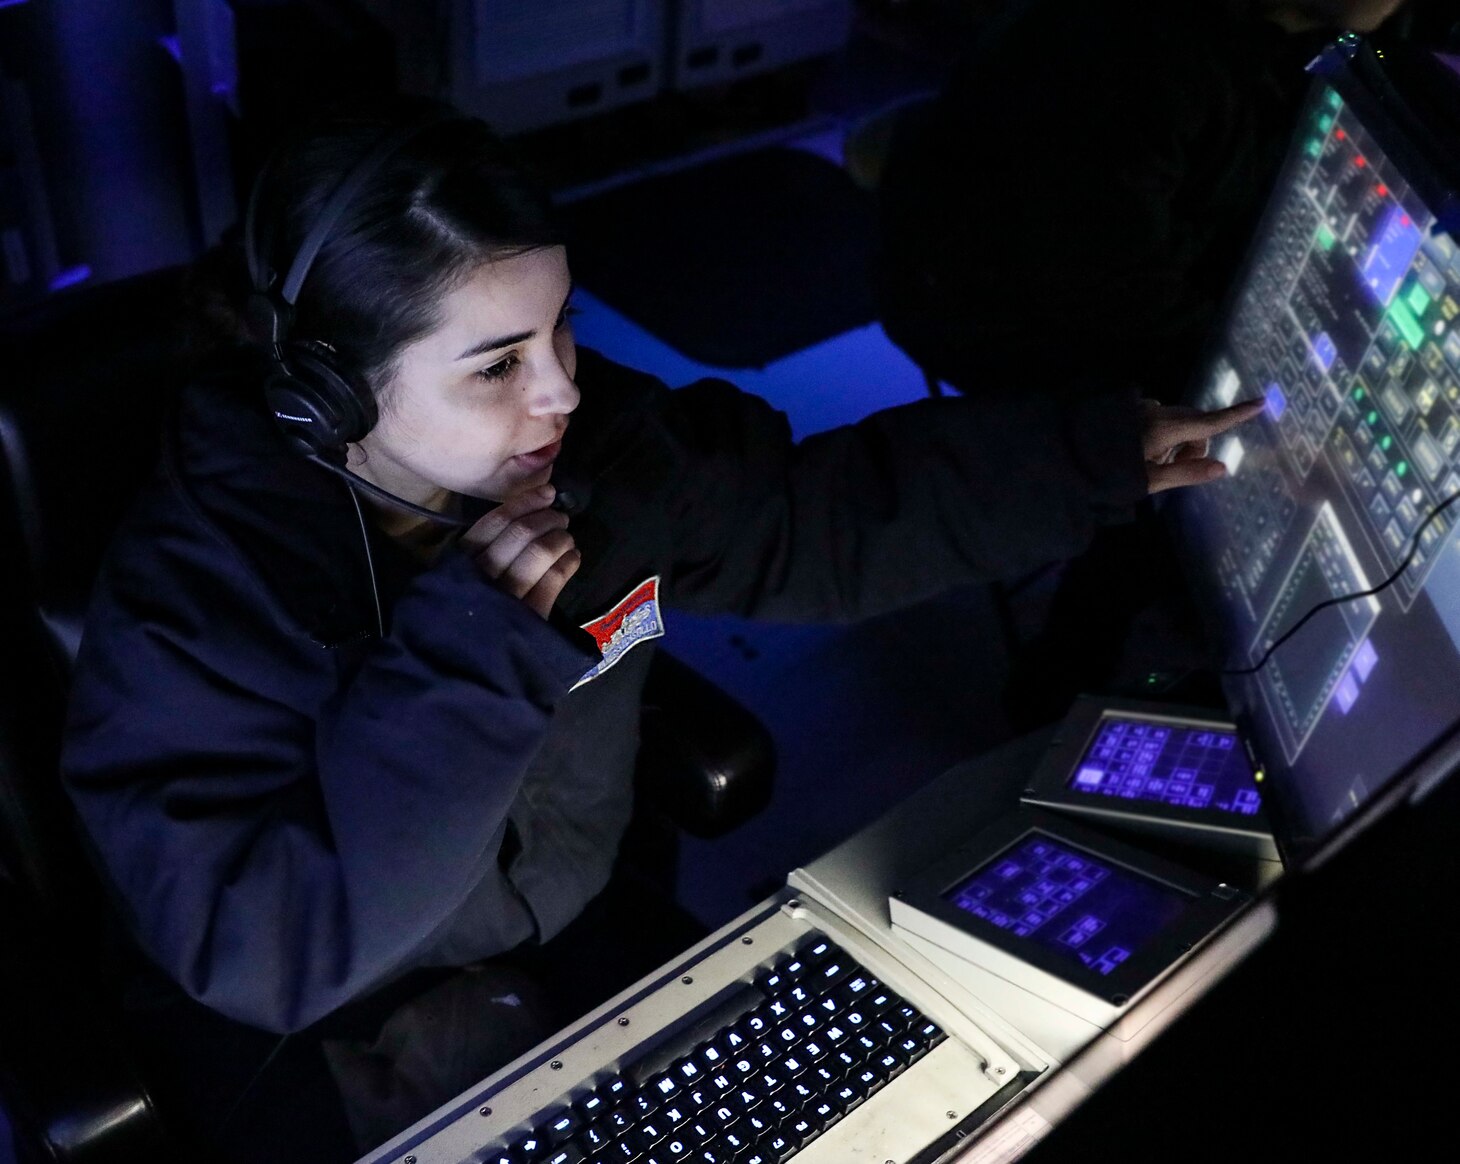 SOUTH CHINA SEA (Sept. 08, 2021) Operations Specialist 3rd Class Vanessa Castillo, from Los Angeles, monitors surface contacts from the combat information center aboard Arleigh Burke-class guided-missile destroyer USS Benfold (DDG 65) as the ship transits the South China Sea conducting routine underway operations. Benfold is forward-deployed to the U.S. 7th Fleet area of operations in support of a free and open Indo-Pacific. (U.S. Navy photo by Mass Communication Specialist 1st Class Deanna C. Gonzales)